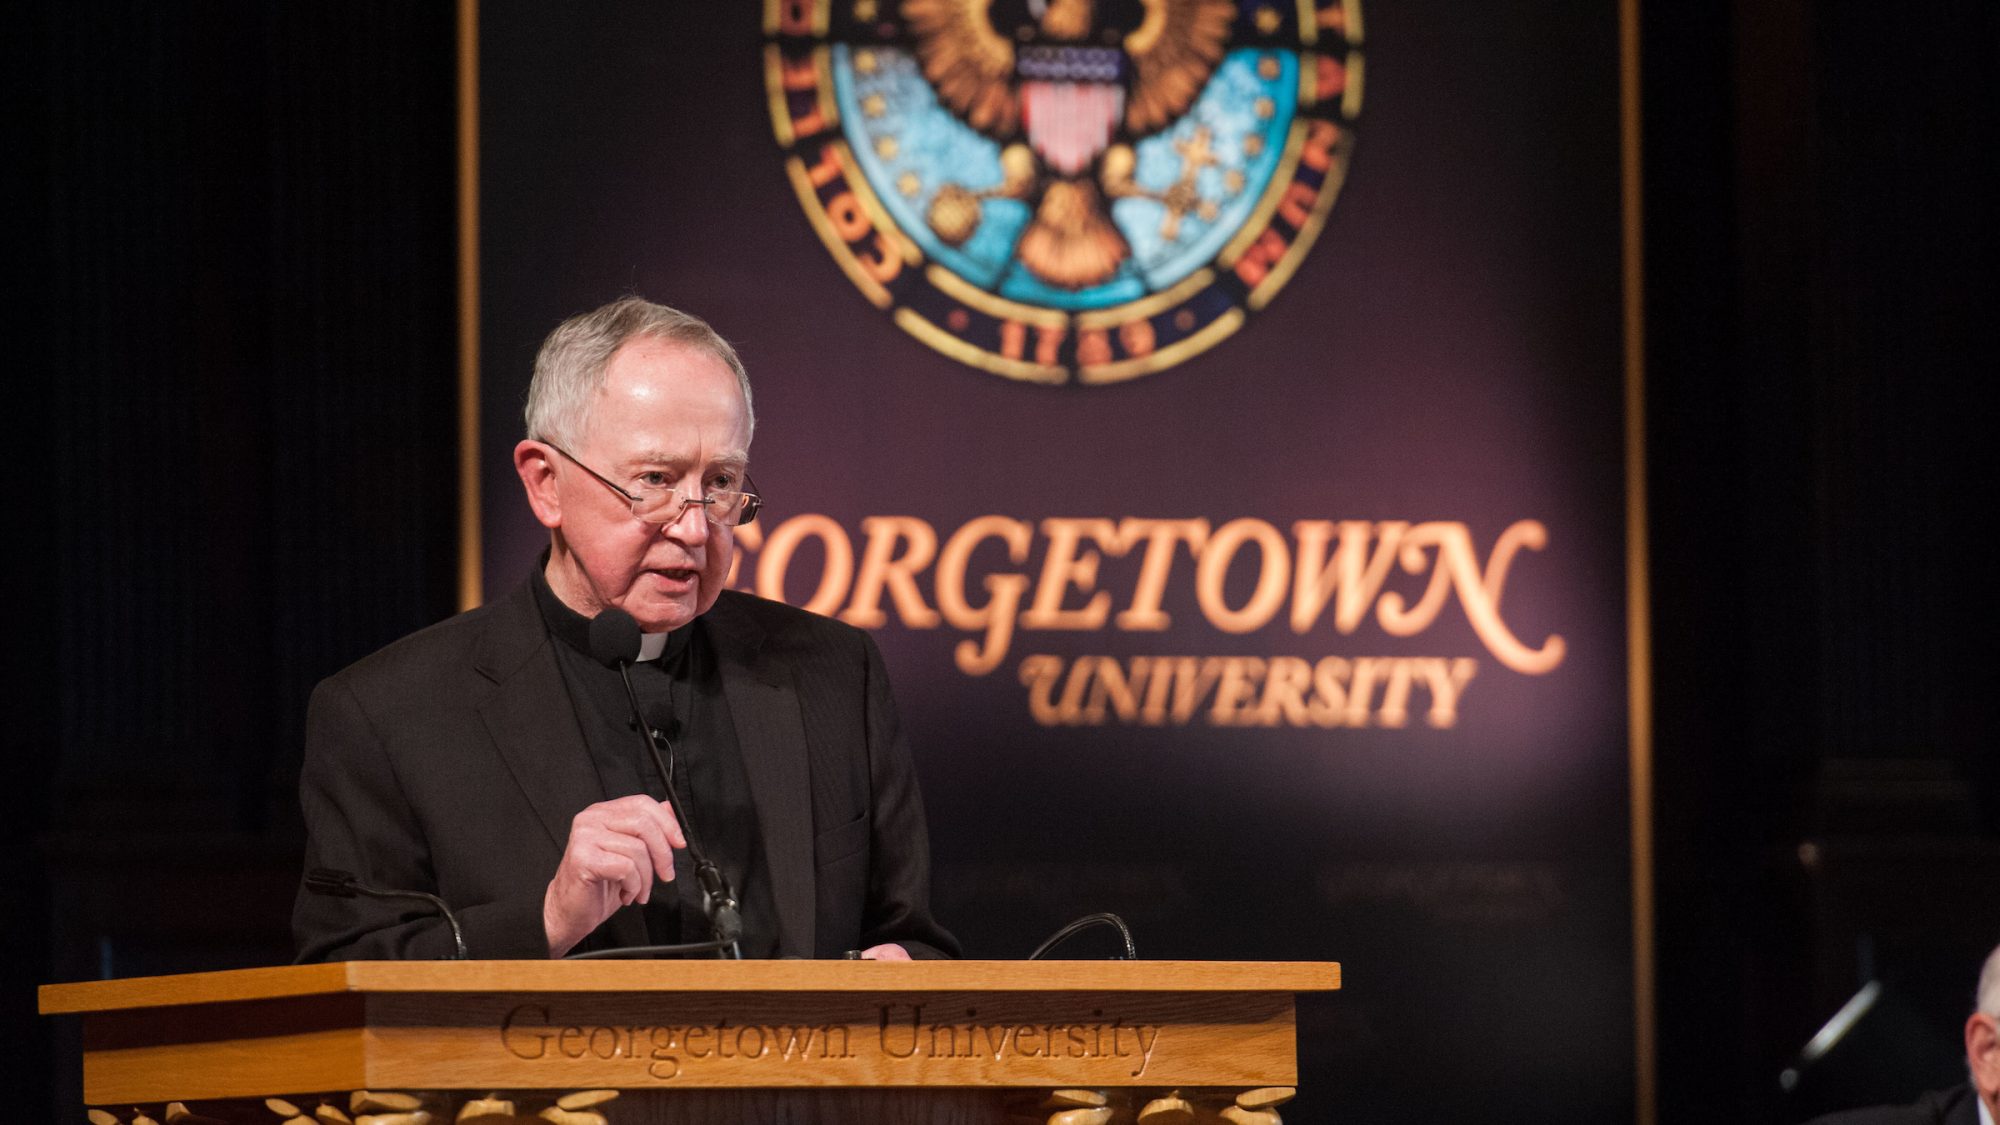 Fr. O&#039;Malley wears glasses, a priest&#039;s collar and black clothes while giving a speech in front of a Georgetown University sign